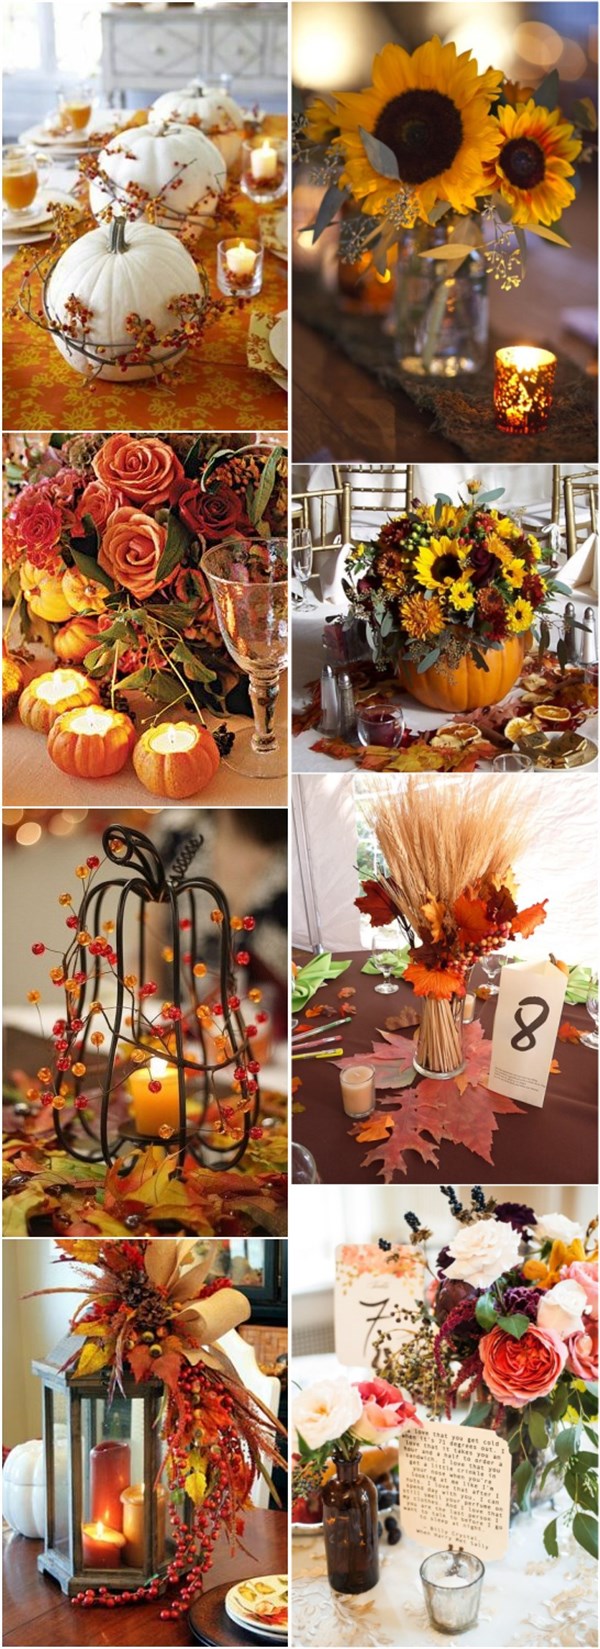 50+ Vibrant and Fun Fall Wedding Centerpieces | Deer Pearl Flowers